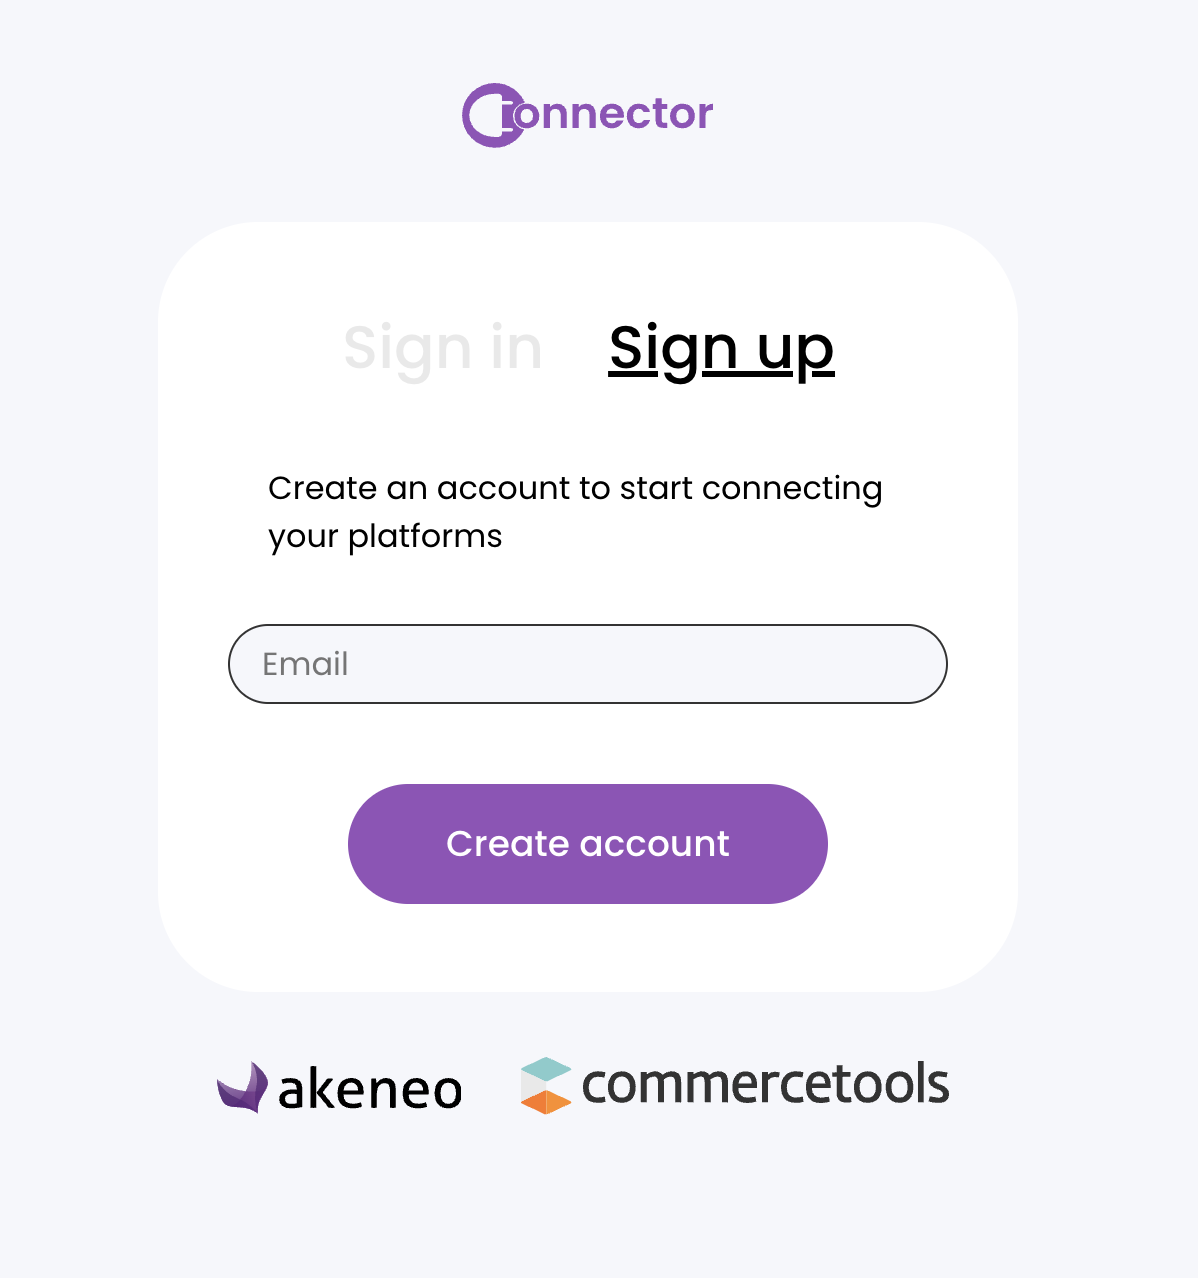 Akeneo - Commercetools sign up page screenshot